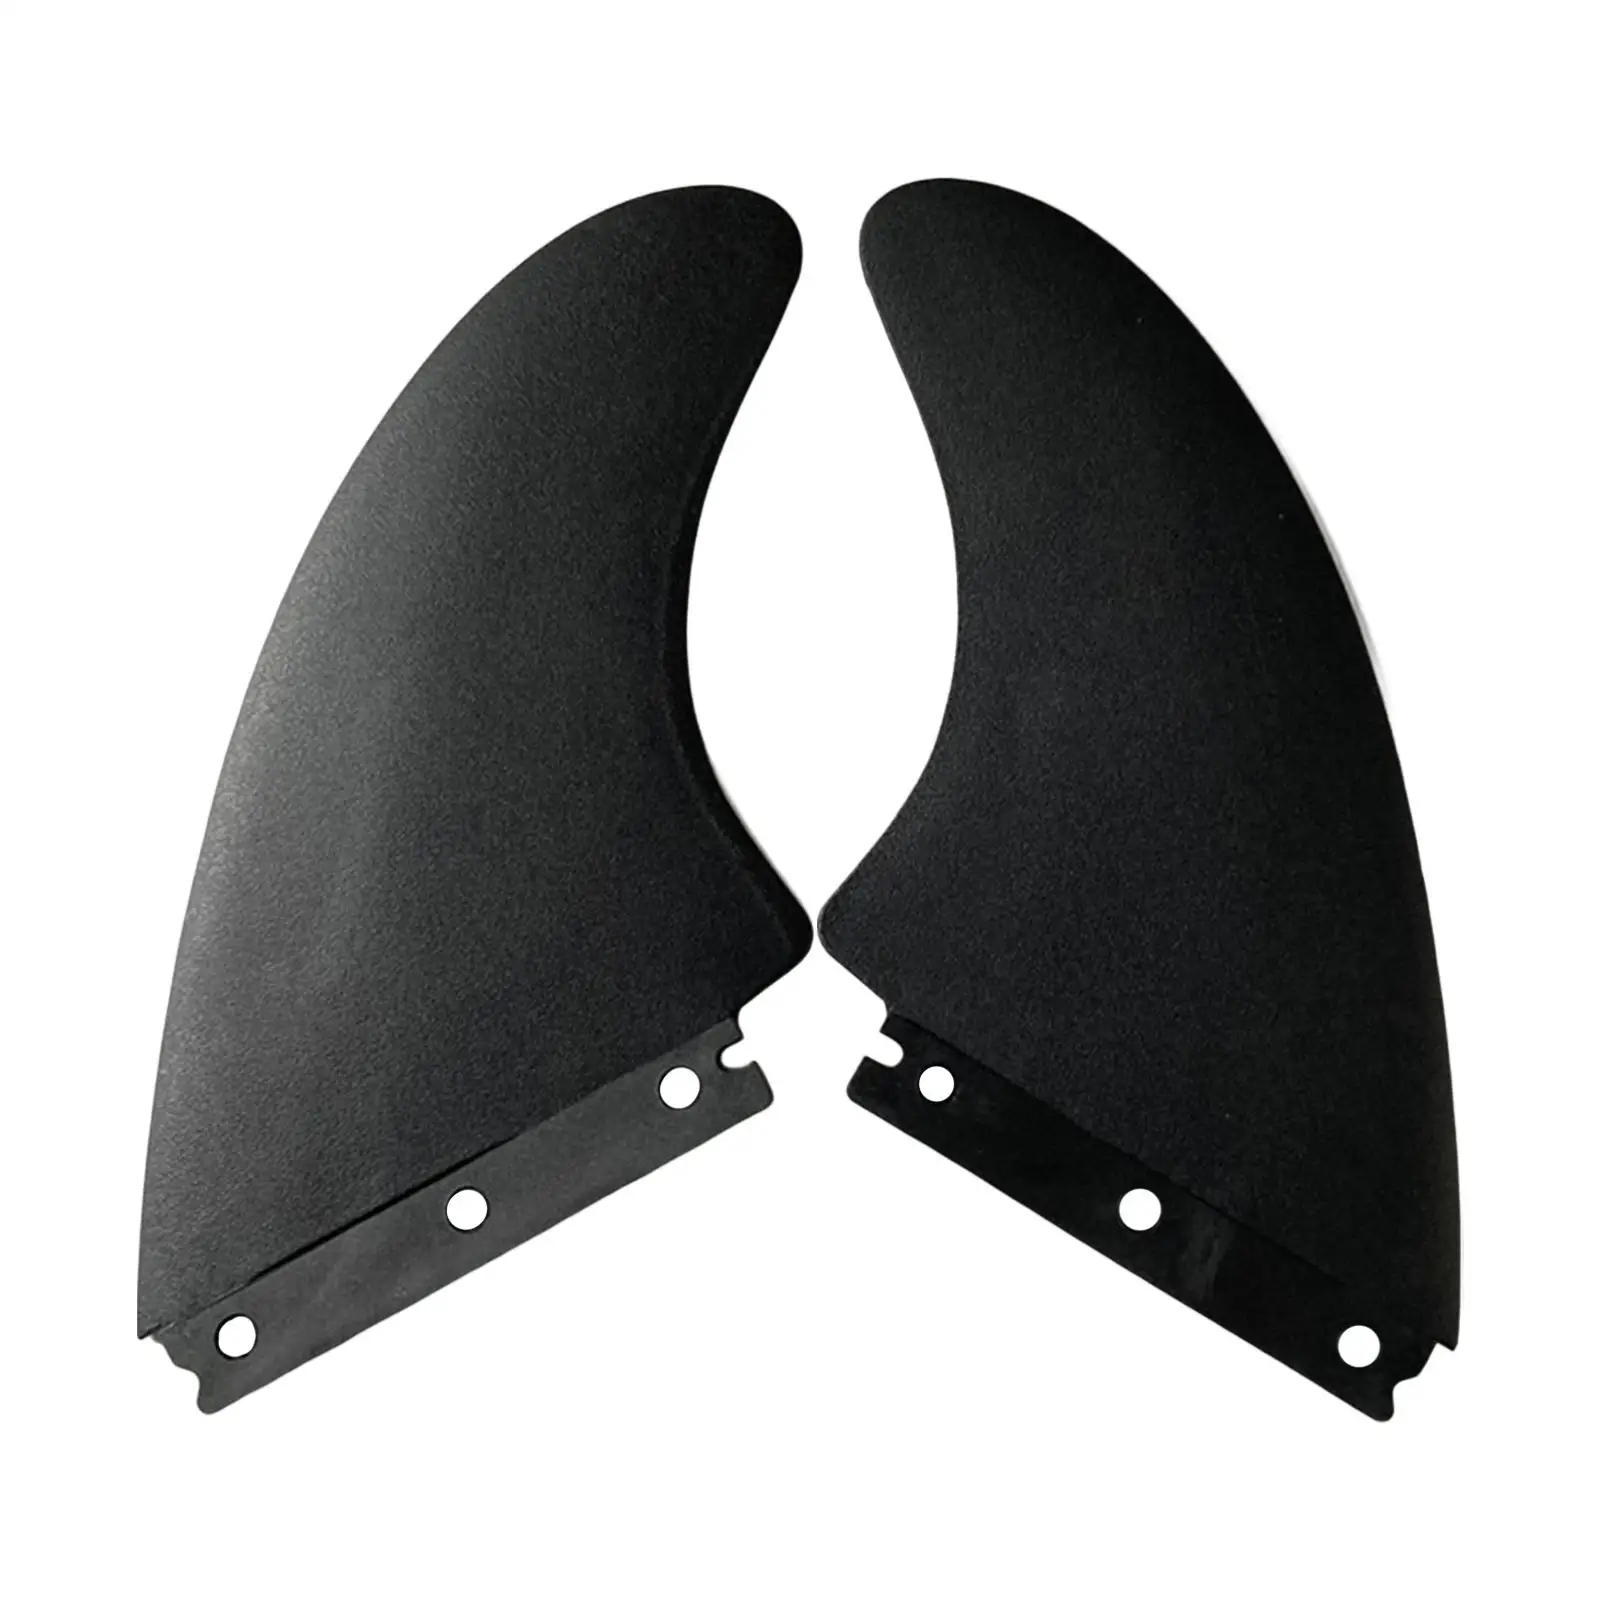 2x Surfboard Fins Water Distributor Surf Surfing Fin Replacement Surfboard Tail Rudder Durable for Water Sports Dinghy